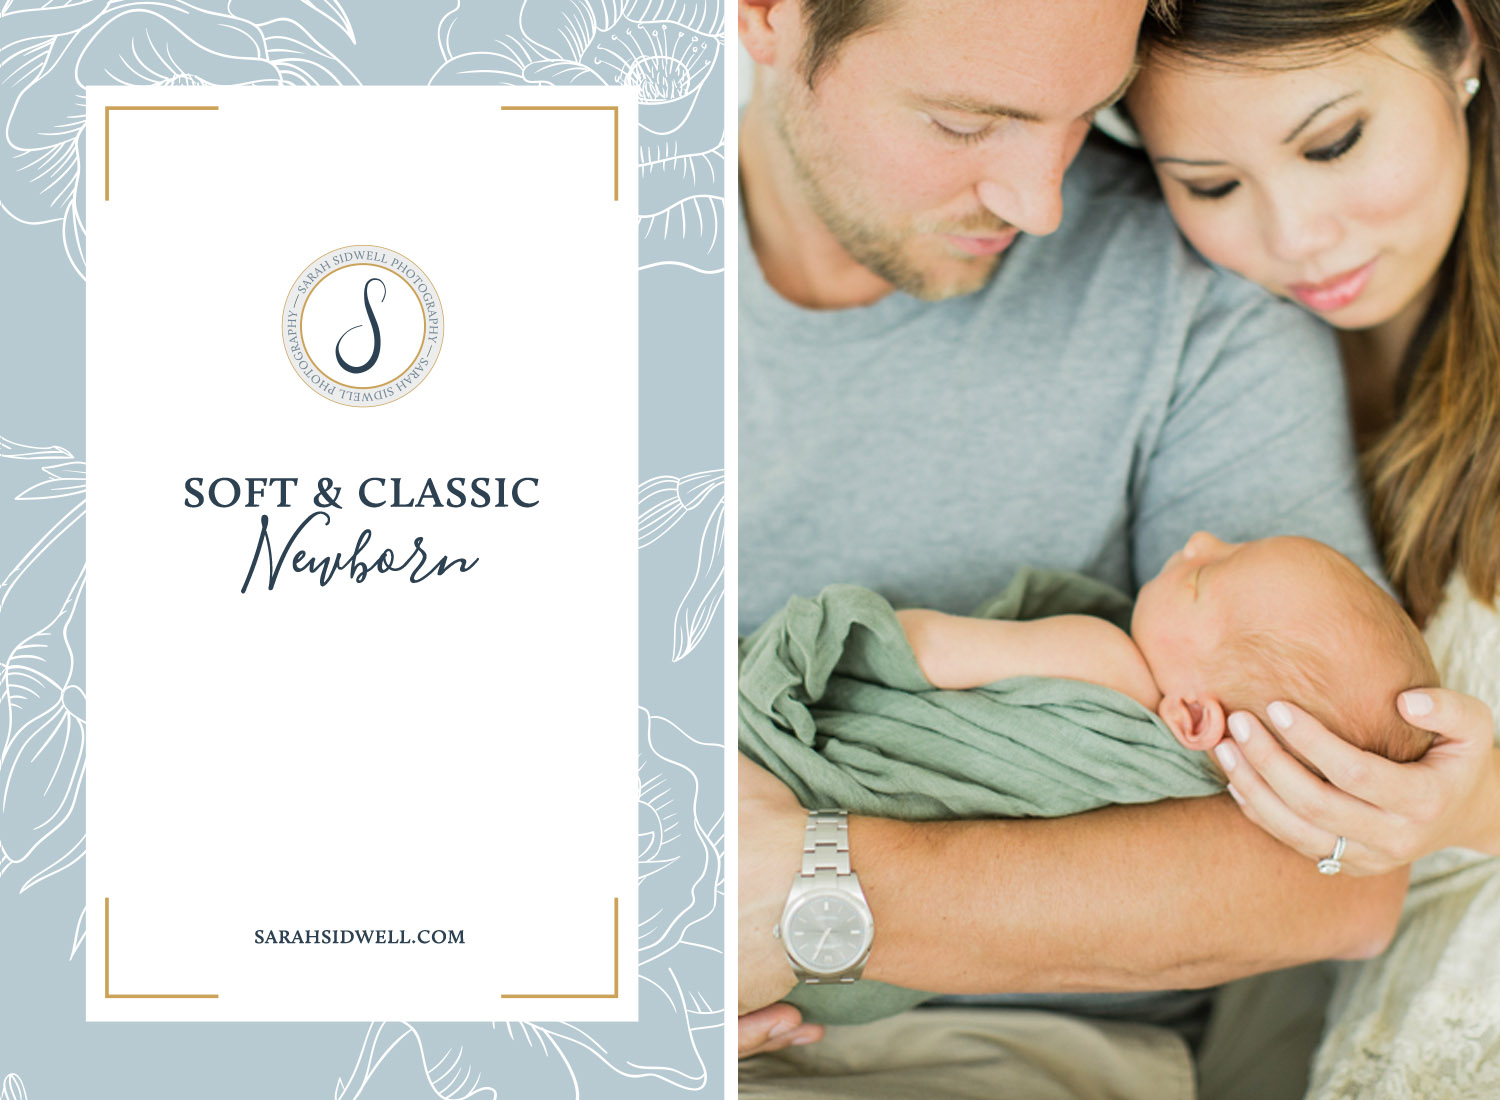 New nashville parents plan their first son's newborn baby photos to be taken by Franklin Tennesee portrait photographer at Sarah Sidwell Photography's newborn studio resulting in classic bright and natural family pho.jpg